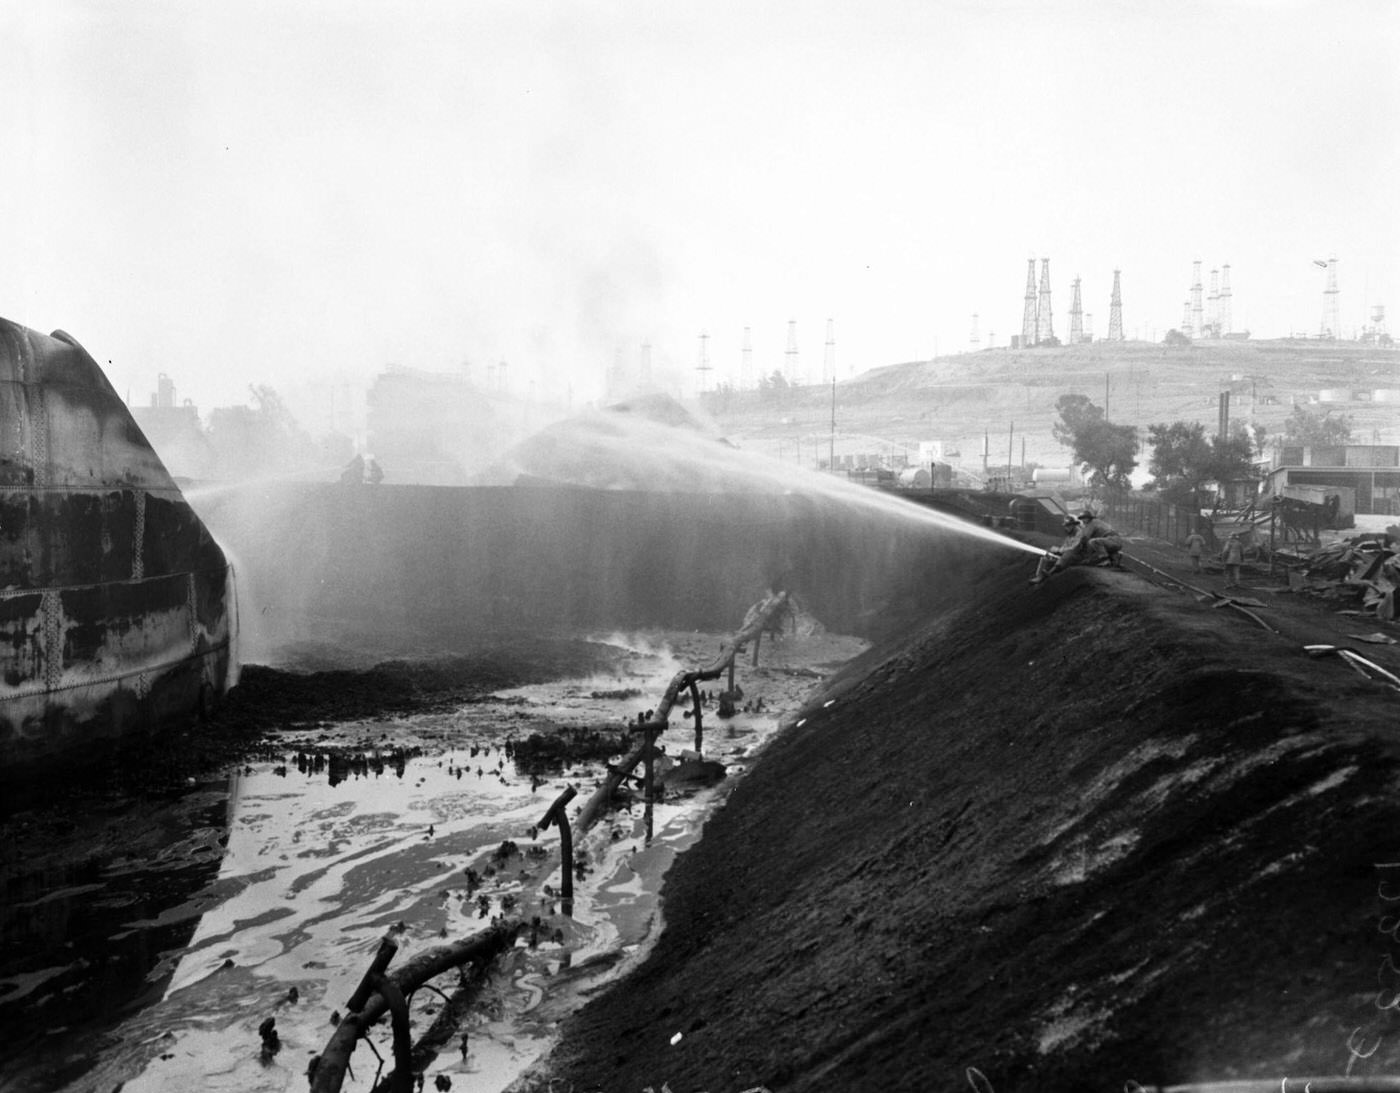 Hancock Oil Fire Clean-Up with Damaged Cars in Foreground, 1958